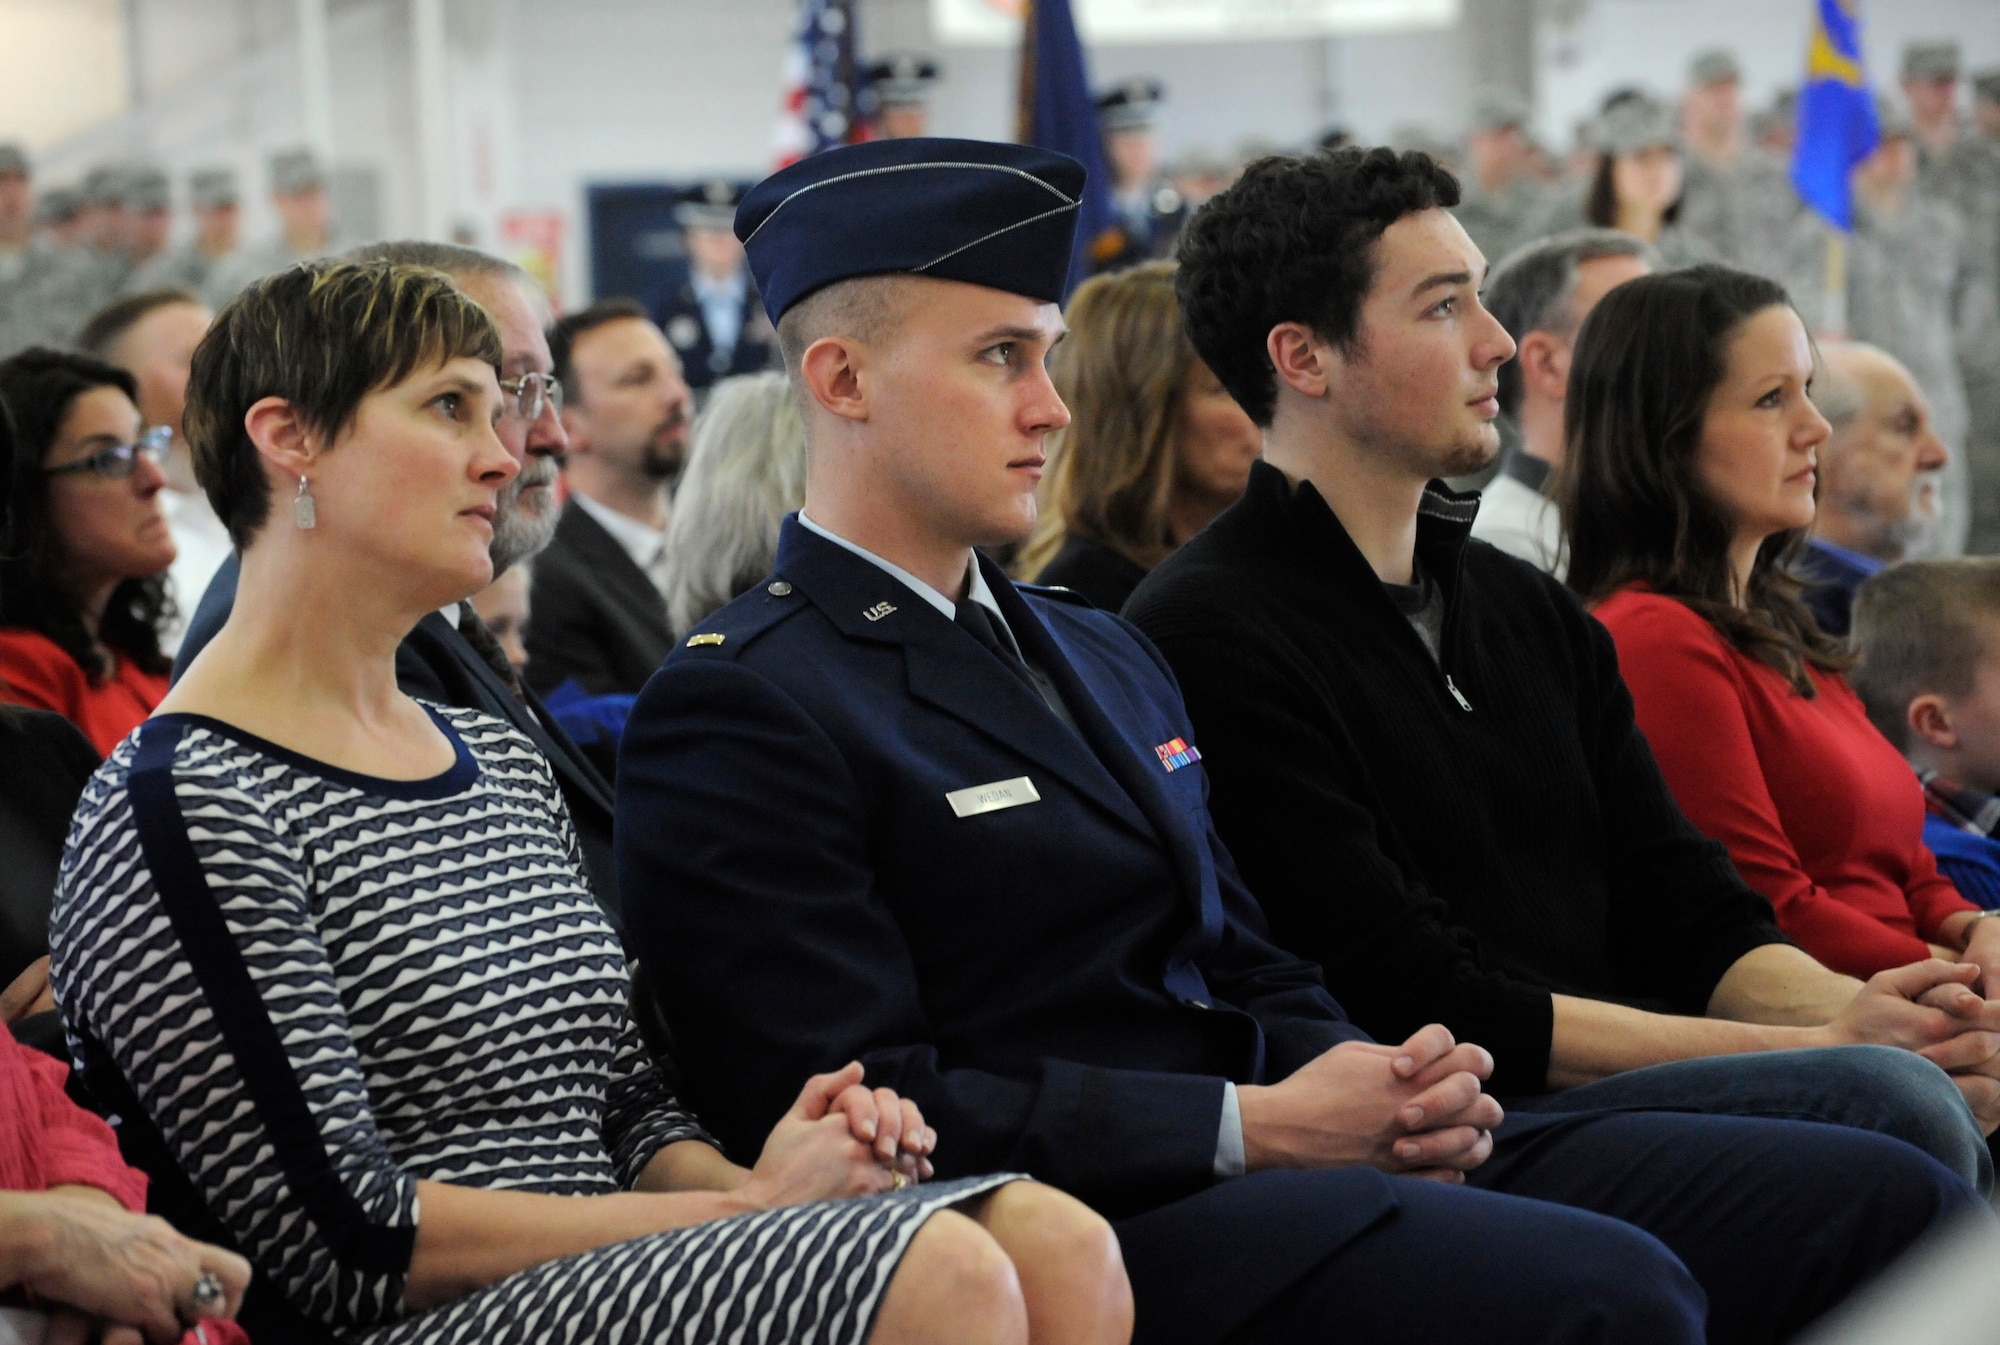 Family members of U.S. Air Force Col. Richard W. Wedan and U.S. Air Force Col. Paul T. Fitzgerald listen to remarks by members of the official party during the Change of Command ceremony held Feb. 7, 2015, Portland Air National Guard Base, Ore. (U.S. Air National Guard photo by Tech. Sgt. John Hughel, 142nd Fighter Wing Public Affairs)